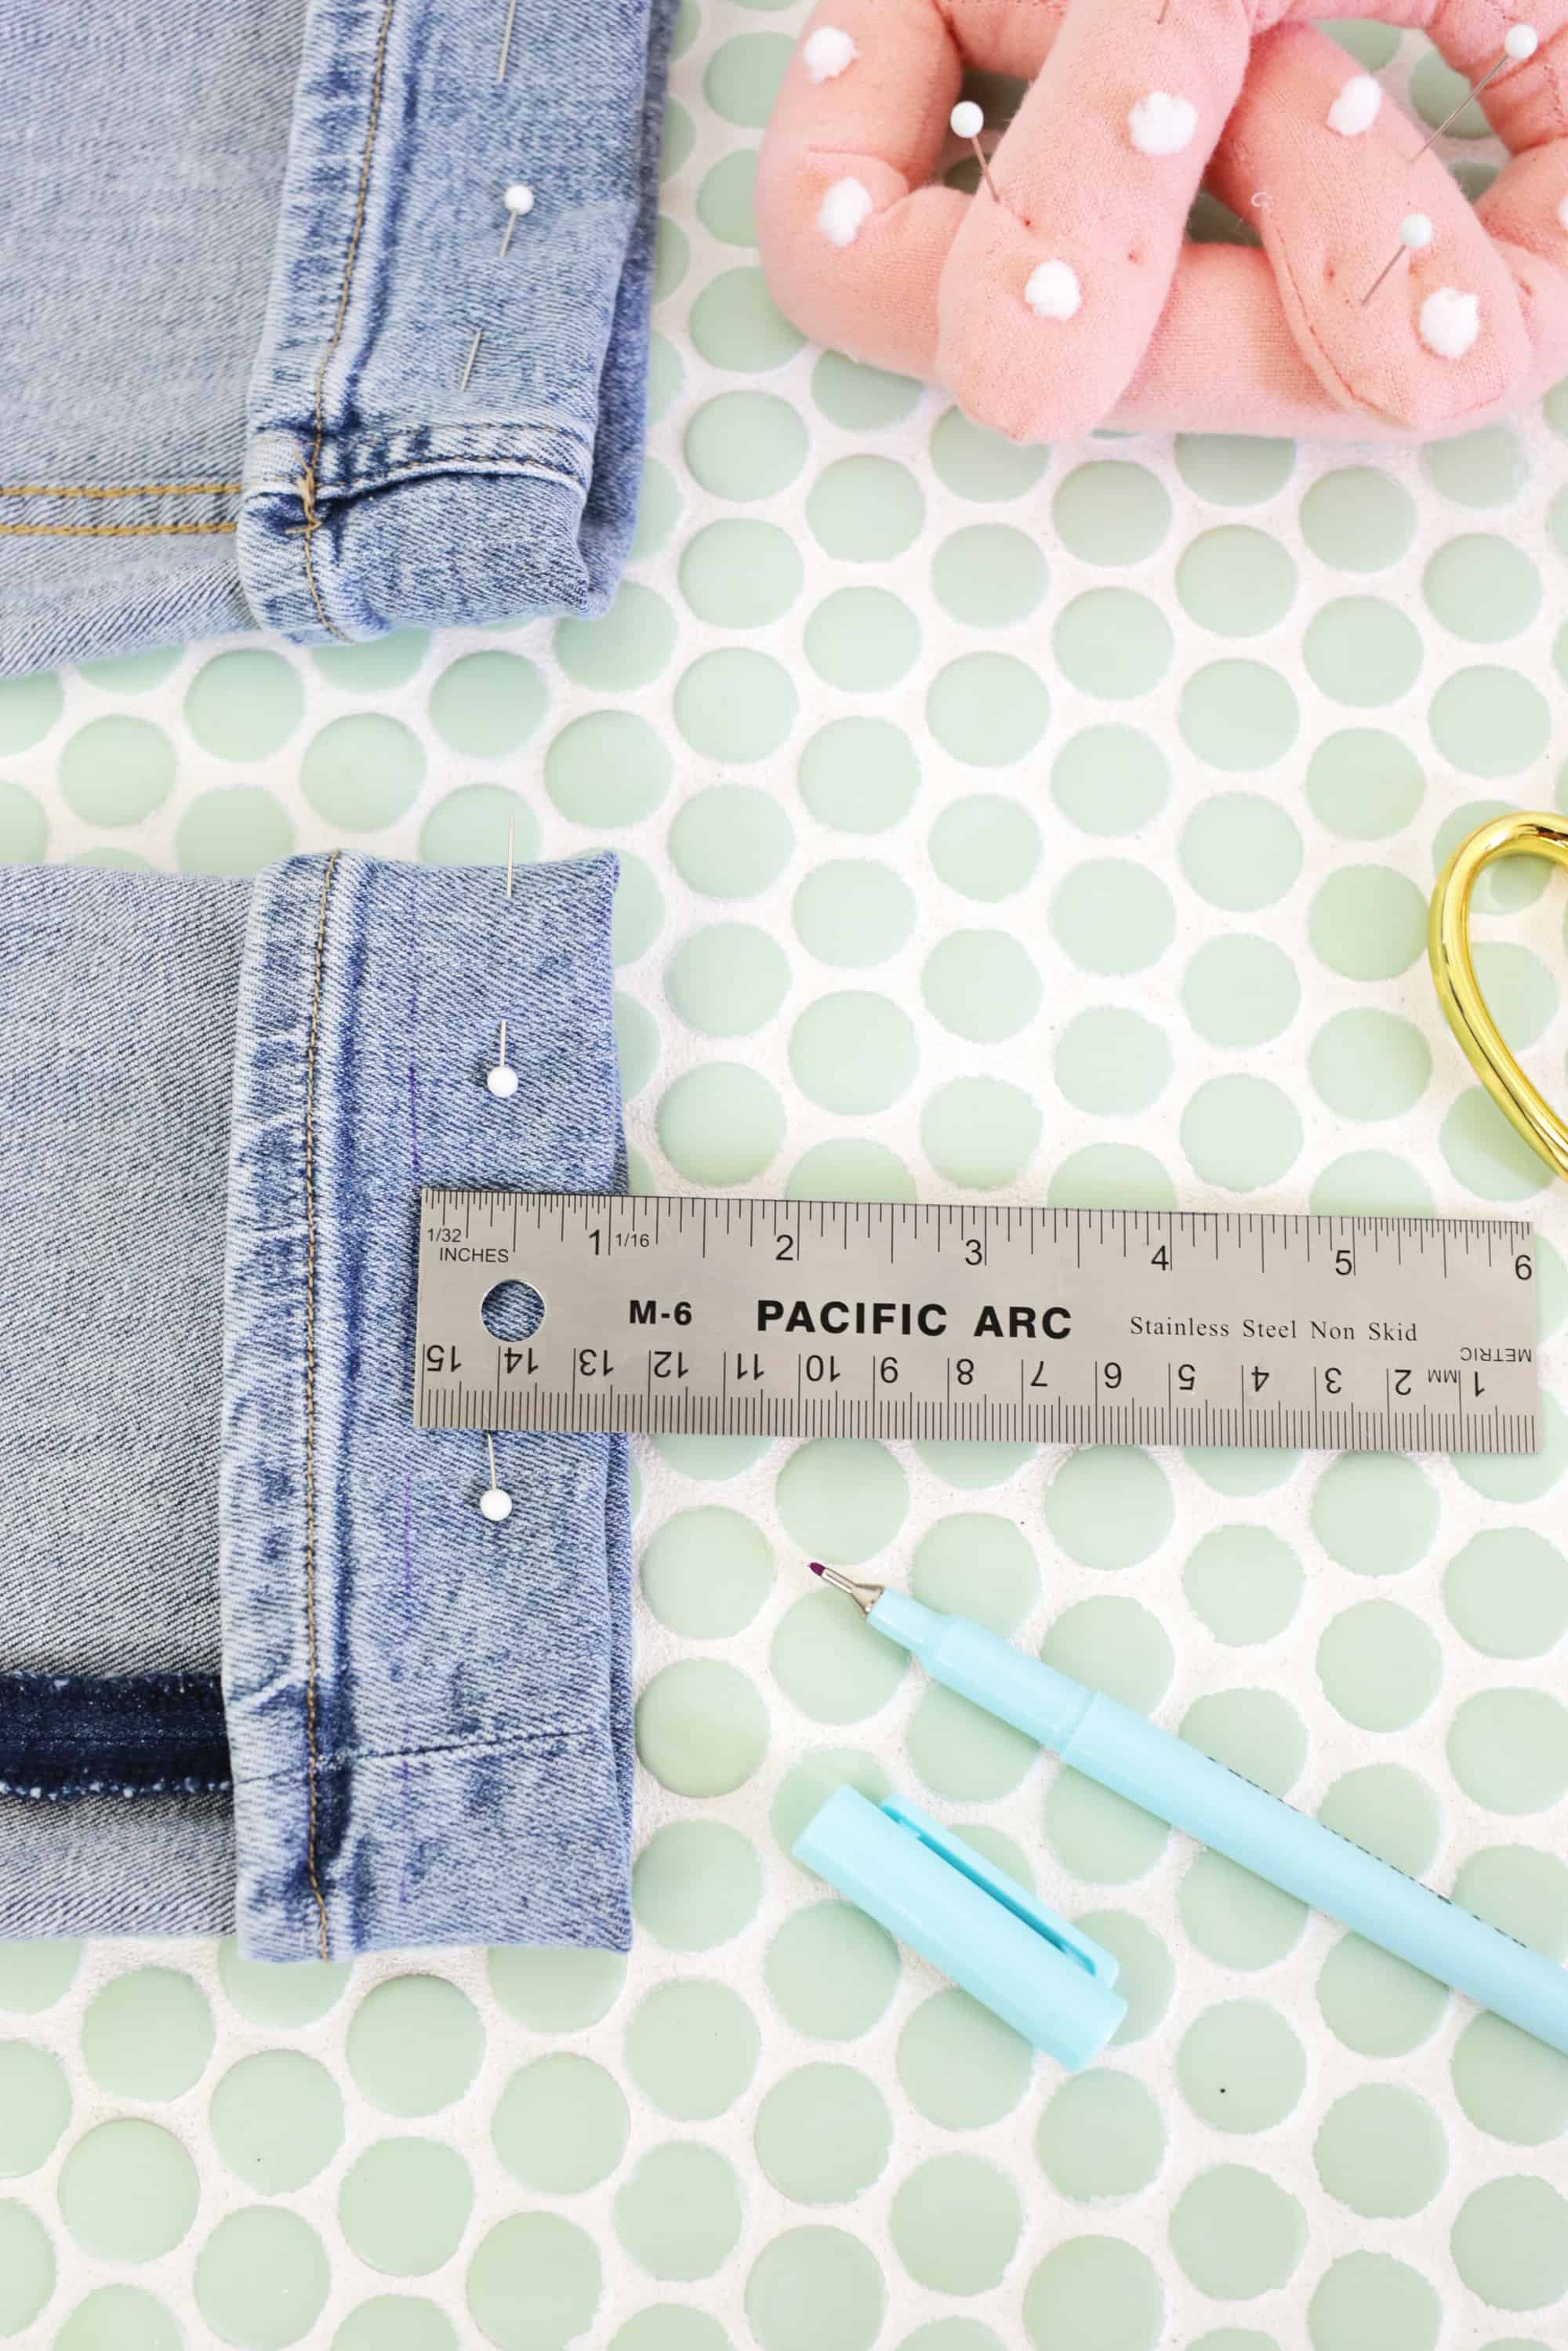 How to Fold Jeans: 6 Quick and Simple Ways